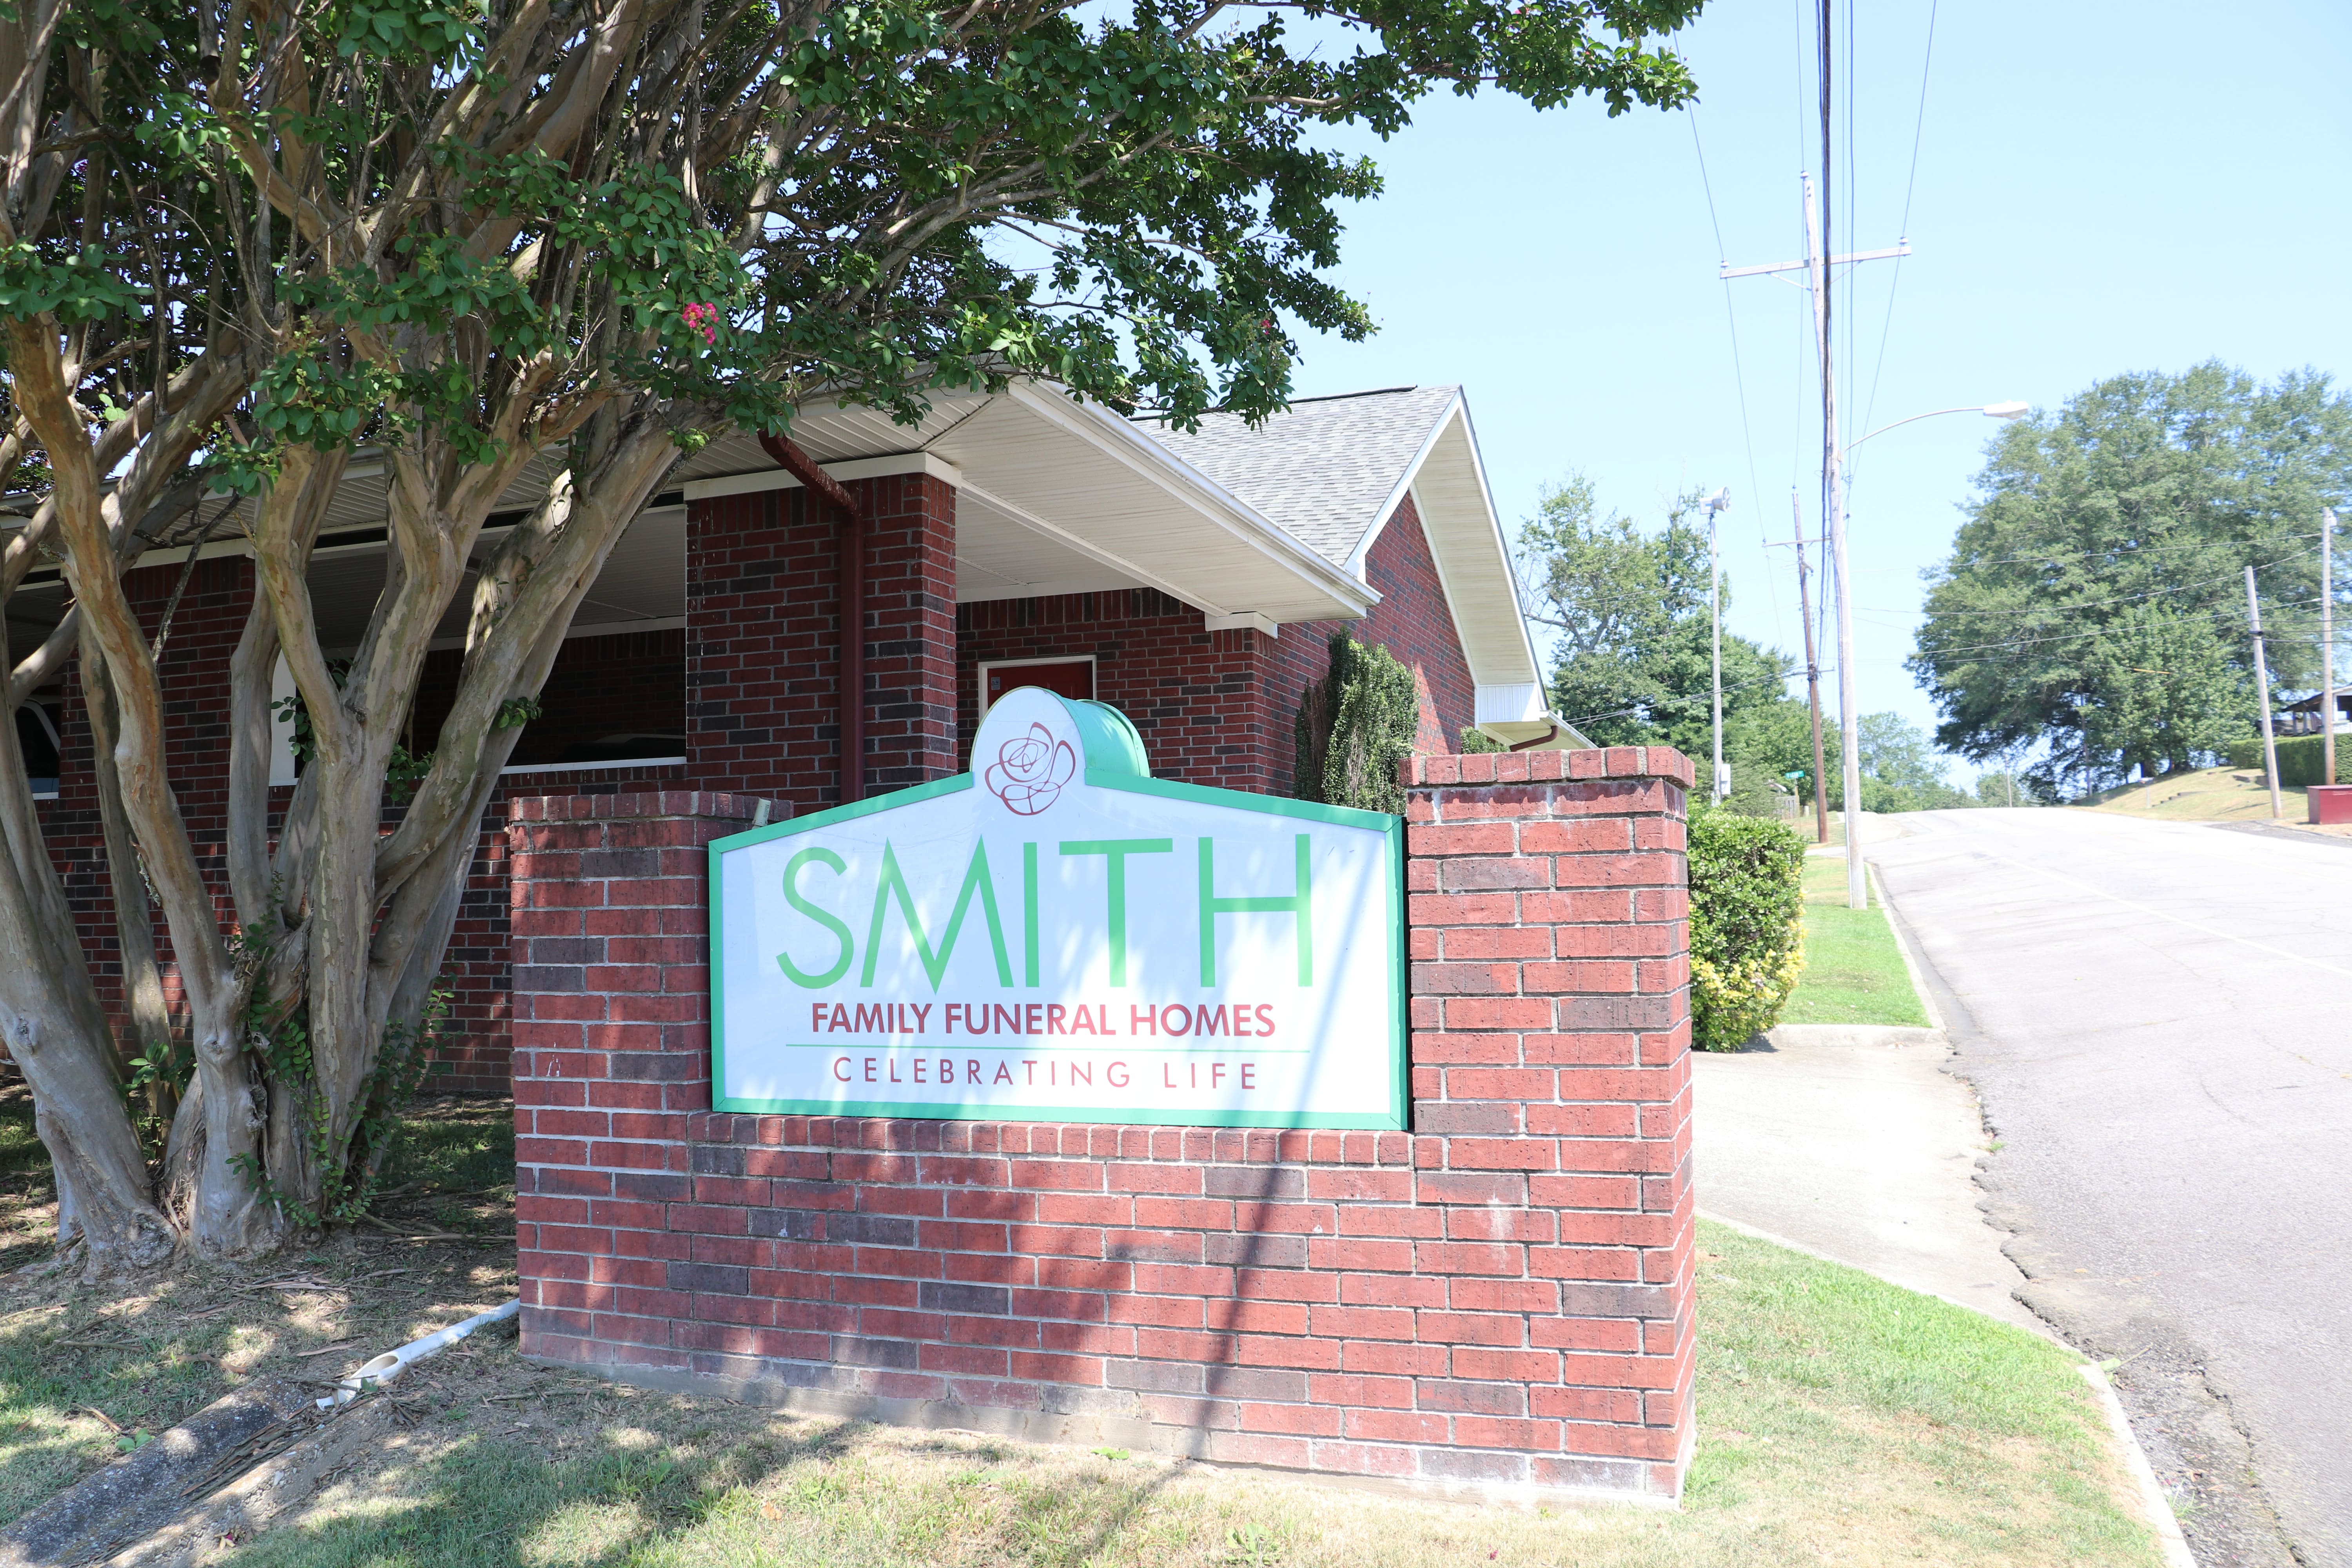 Soup Bowl To Go: Q&A with Smith's Funeral Homes